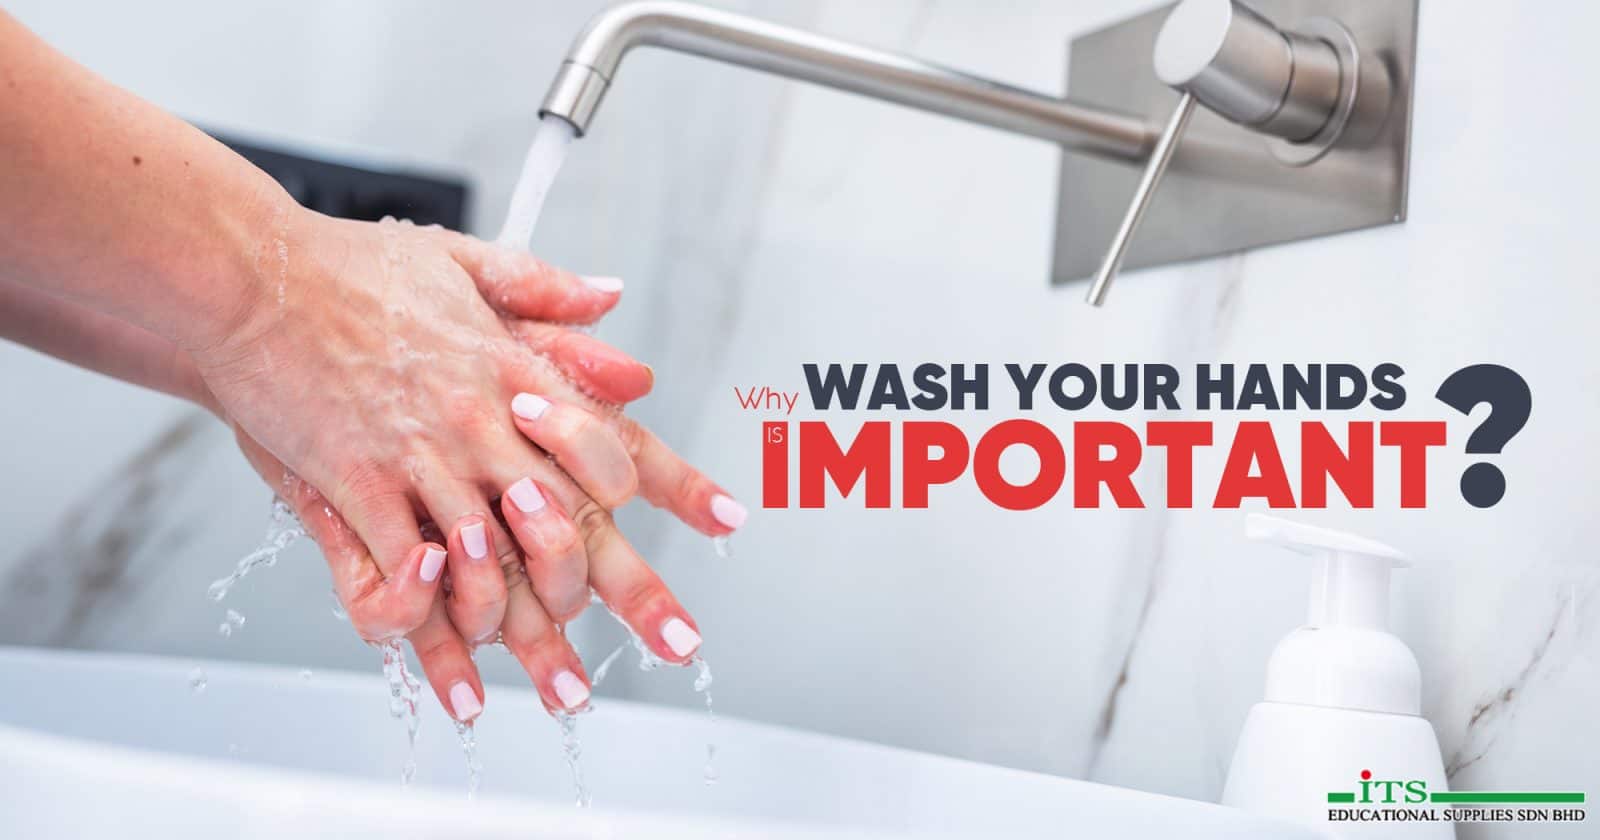 Why Wash Your Hands is Important